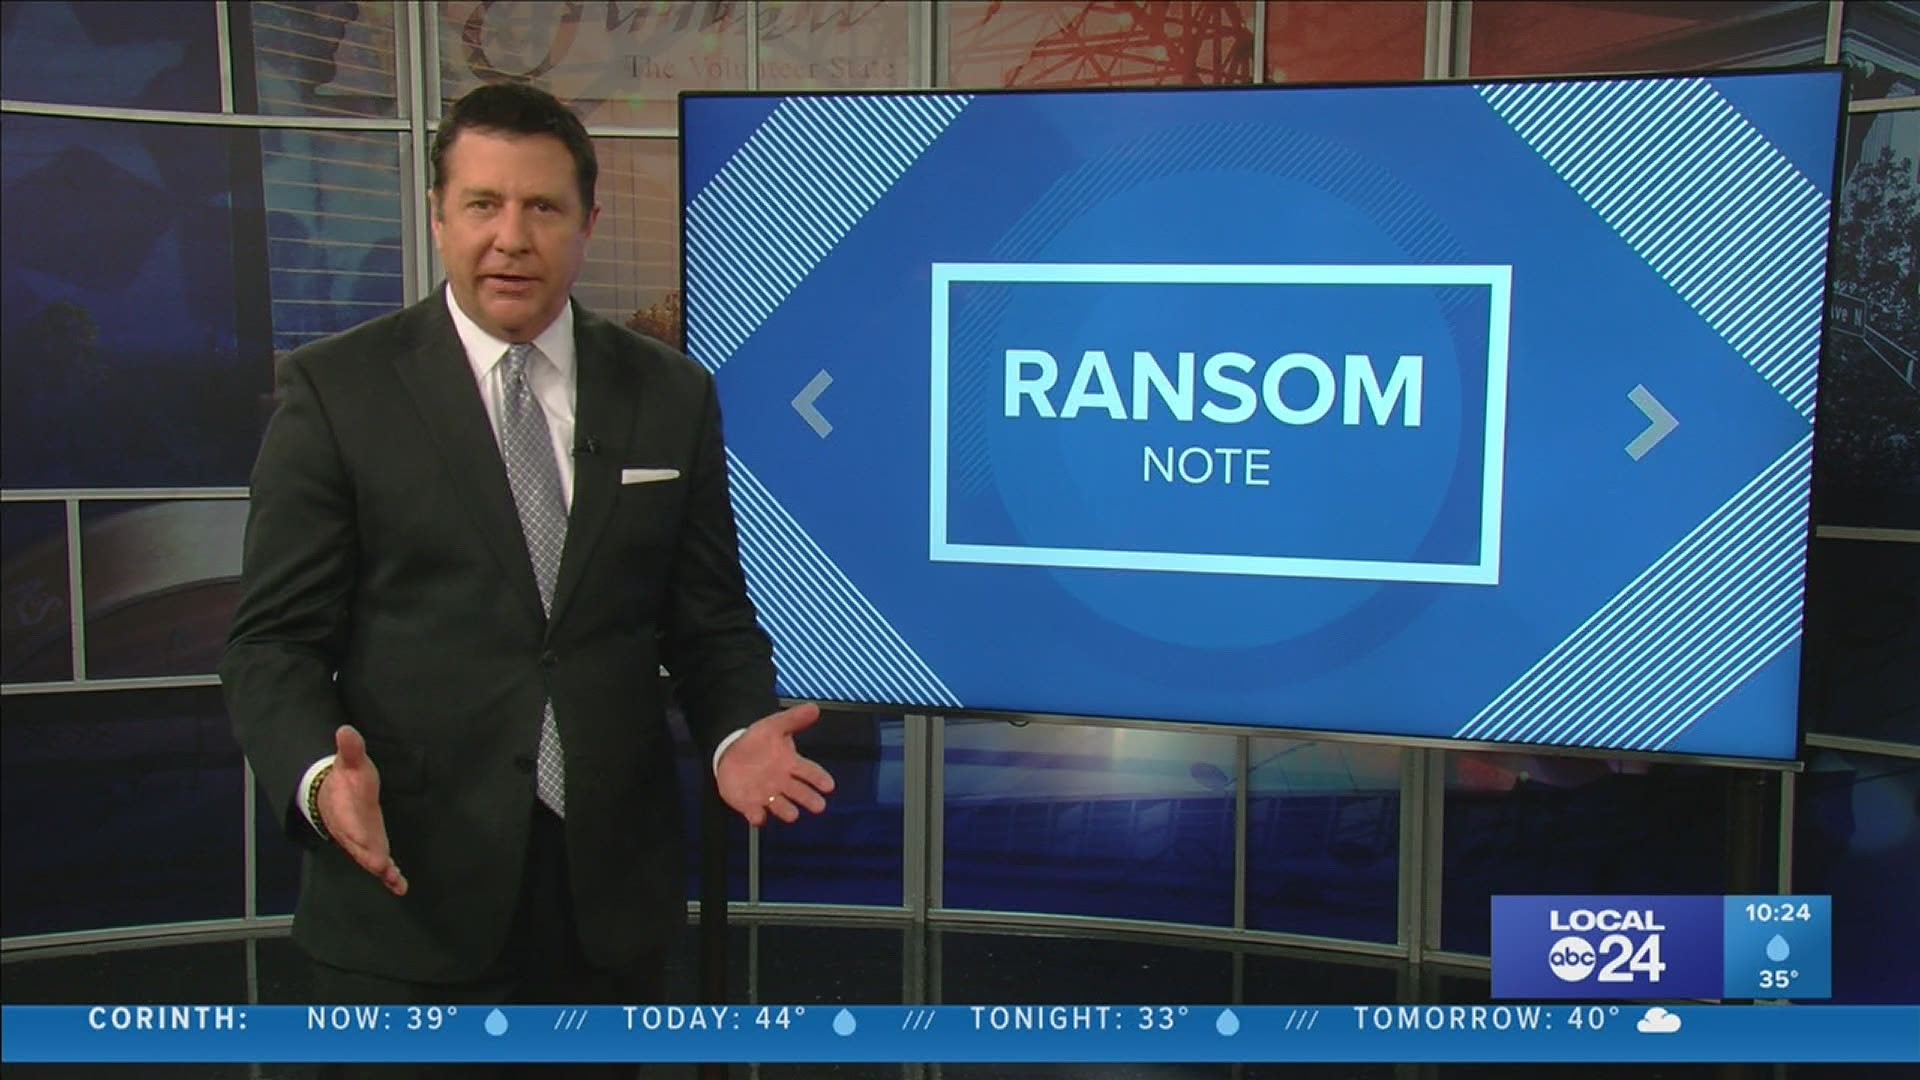 Local 24 News Anchor Richard Ransom discusses in his Ransom Note about how much alcohol sales have gone up since the start of the pandemic.